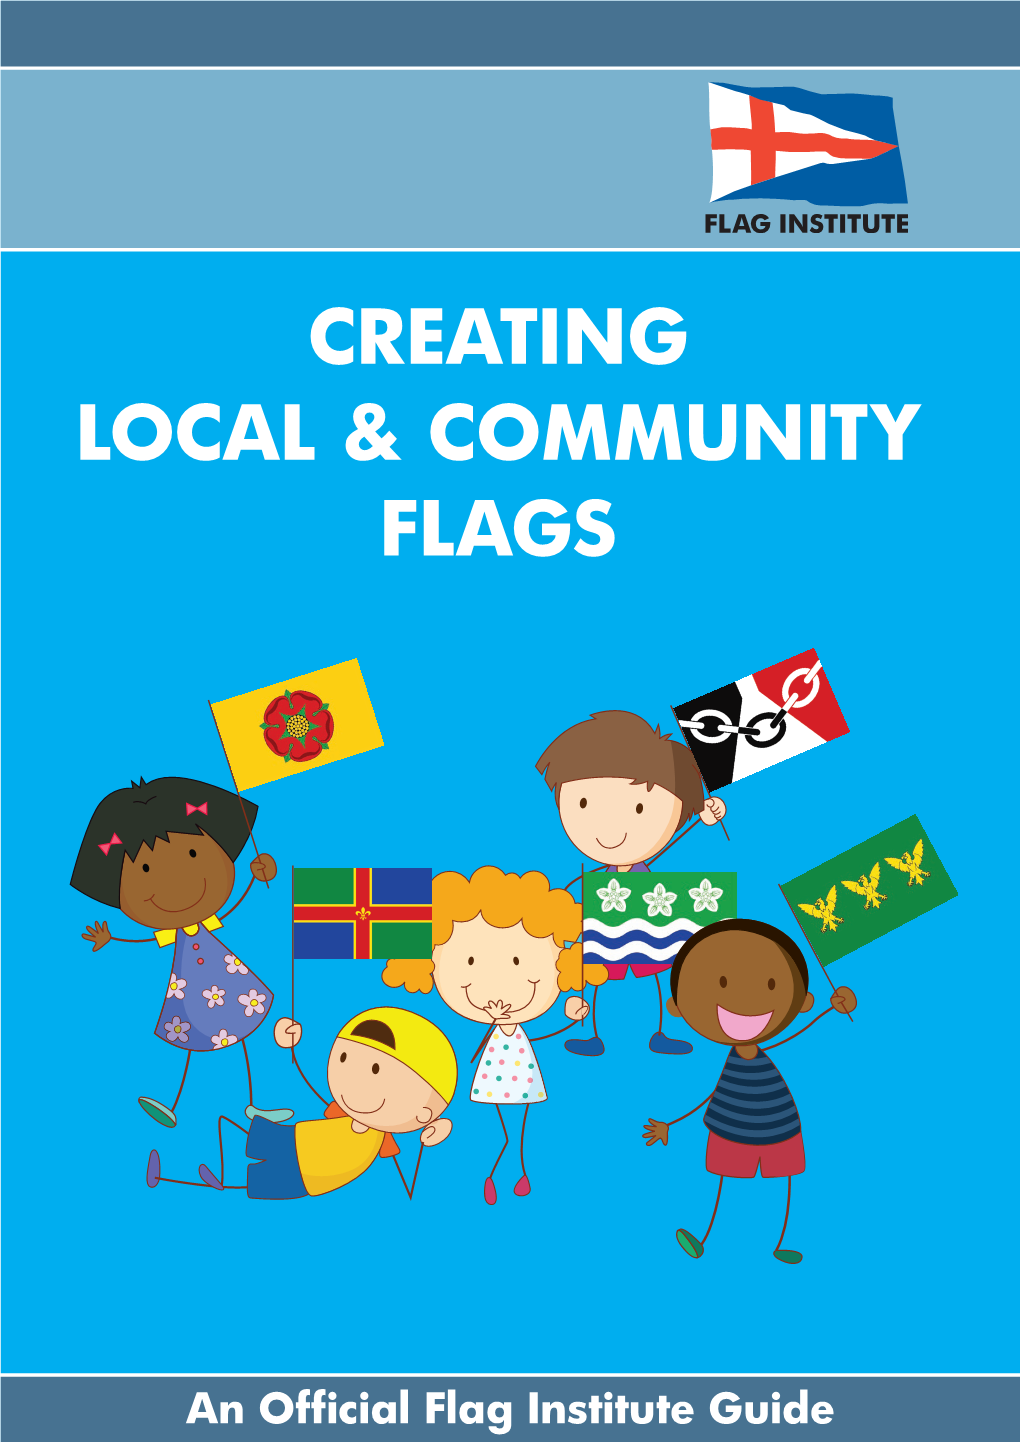 Creating Local & Community Flags